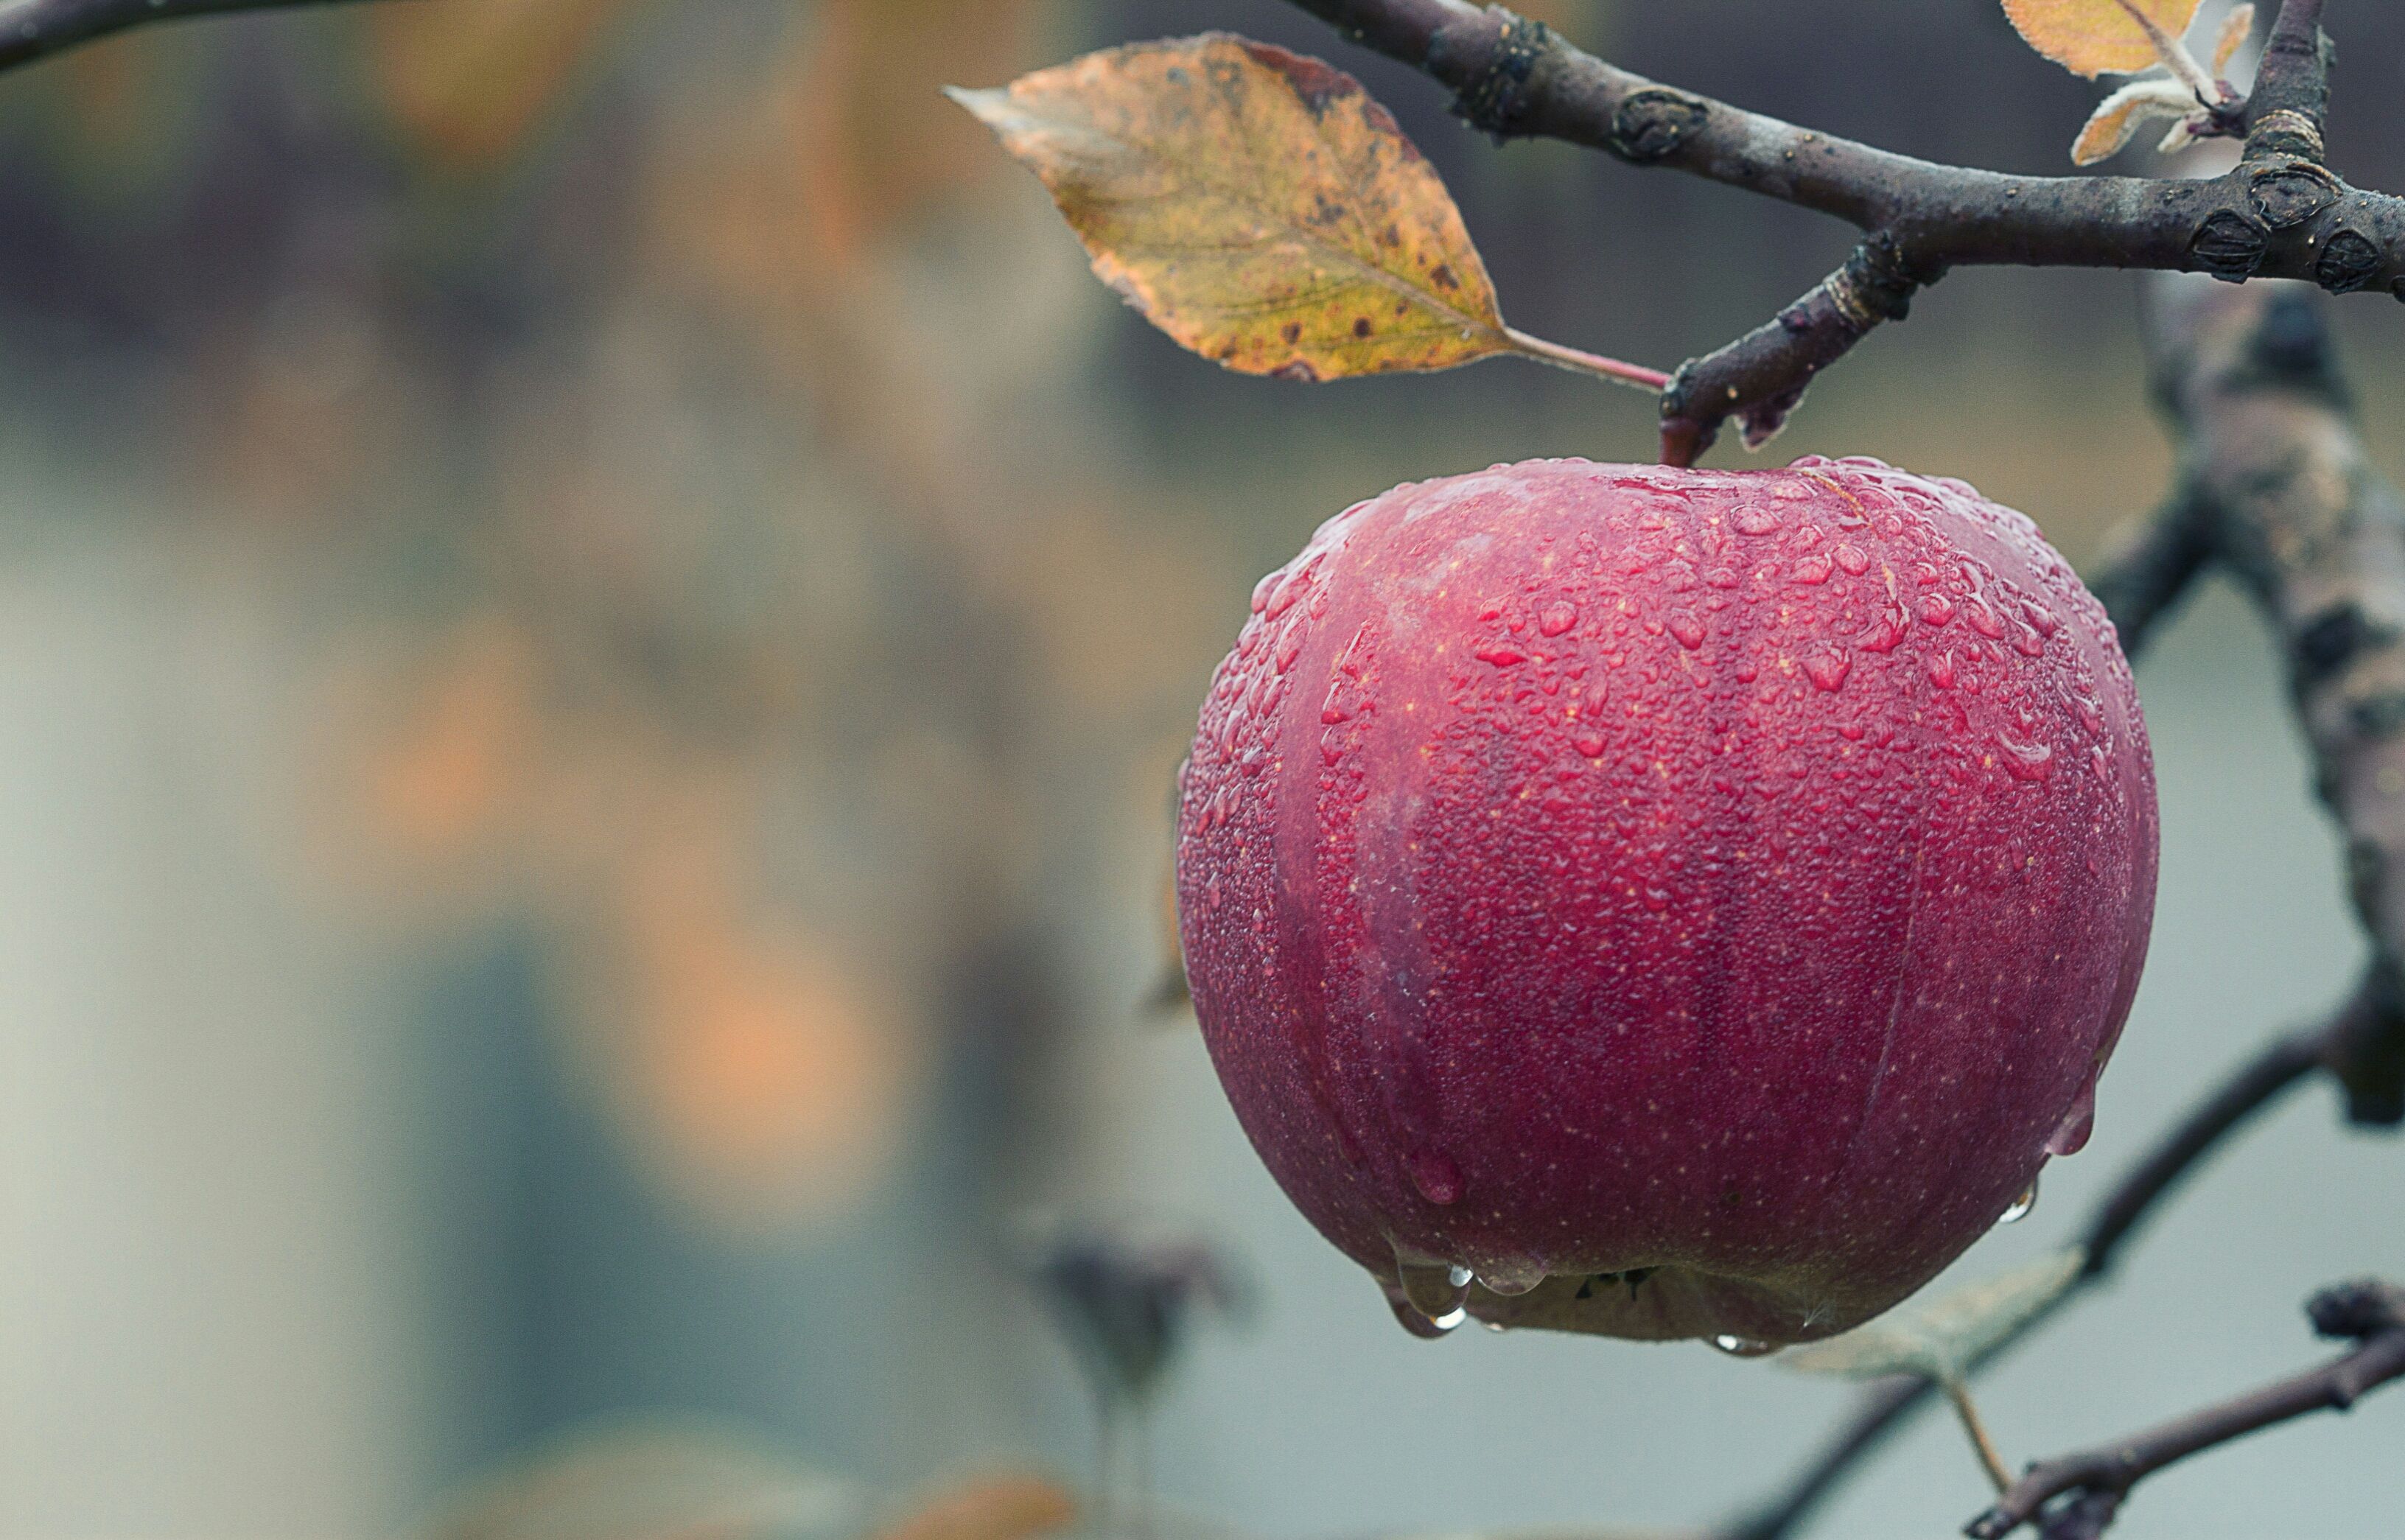 How Different Types of Apples Got Their Names